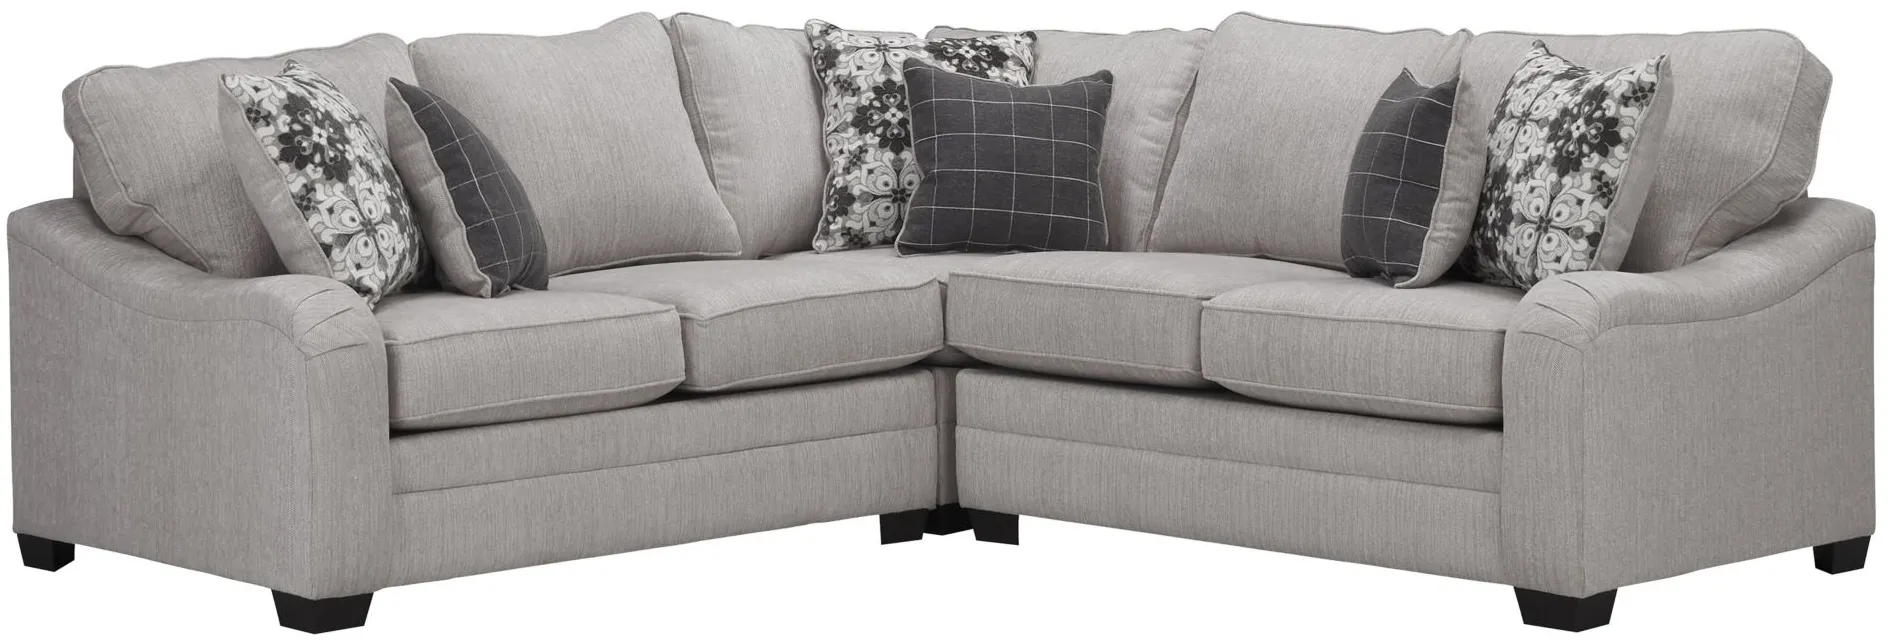 Caid 3-pc. Chenille Sectional in Gray by Flair